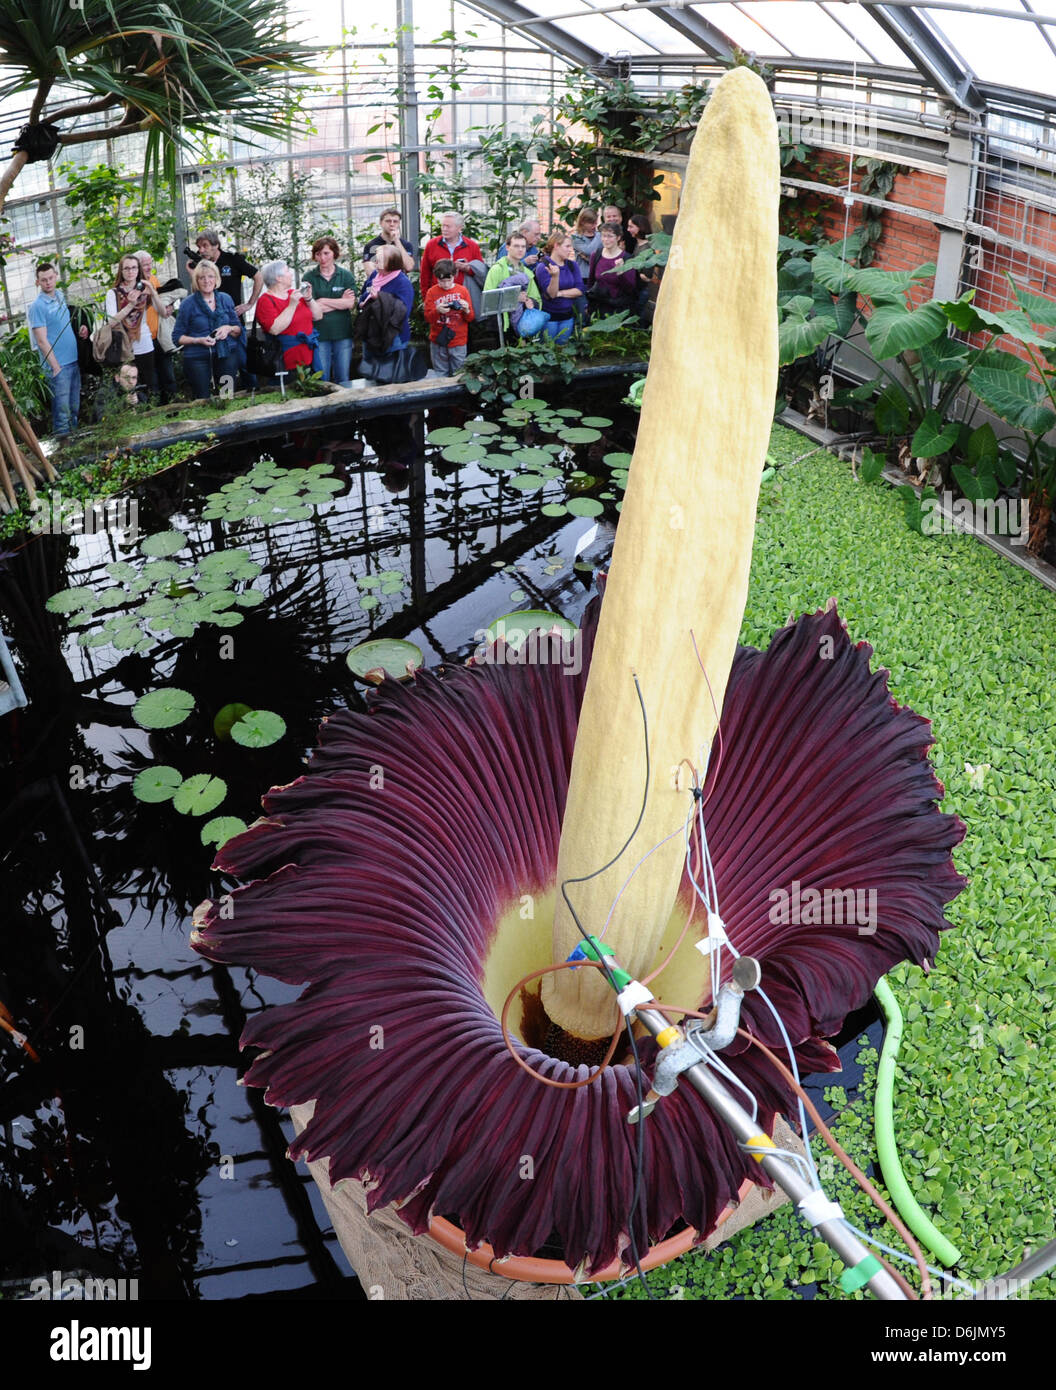 A Titan Arum Or Corpse Flower Blossoms At The Botanic Gardens In